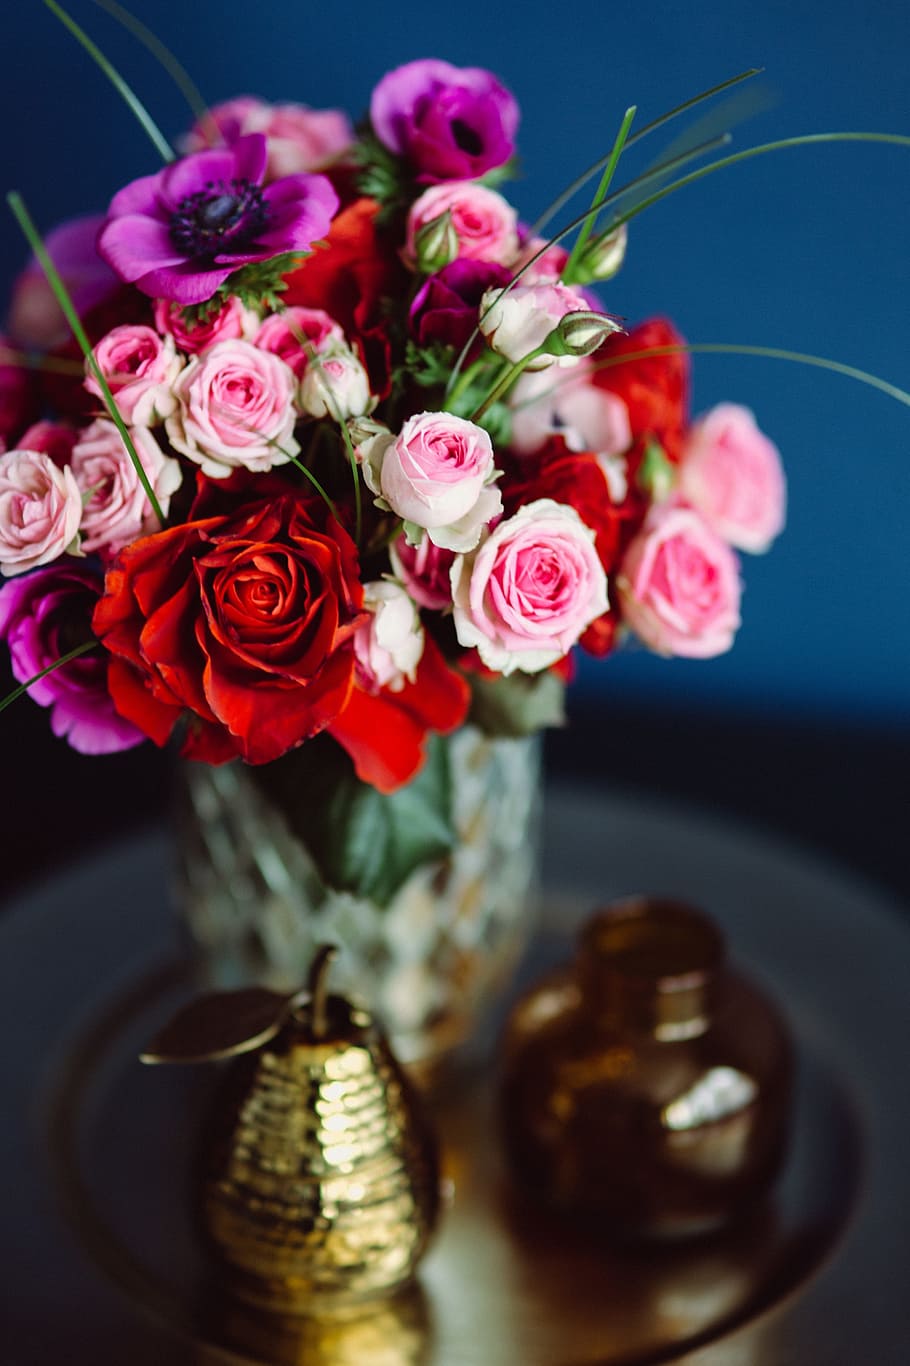 neatly, arranged, flowers, vase, roses, floral, pink, red, bouquet, flower